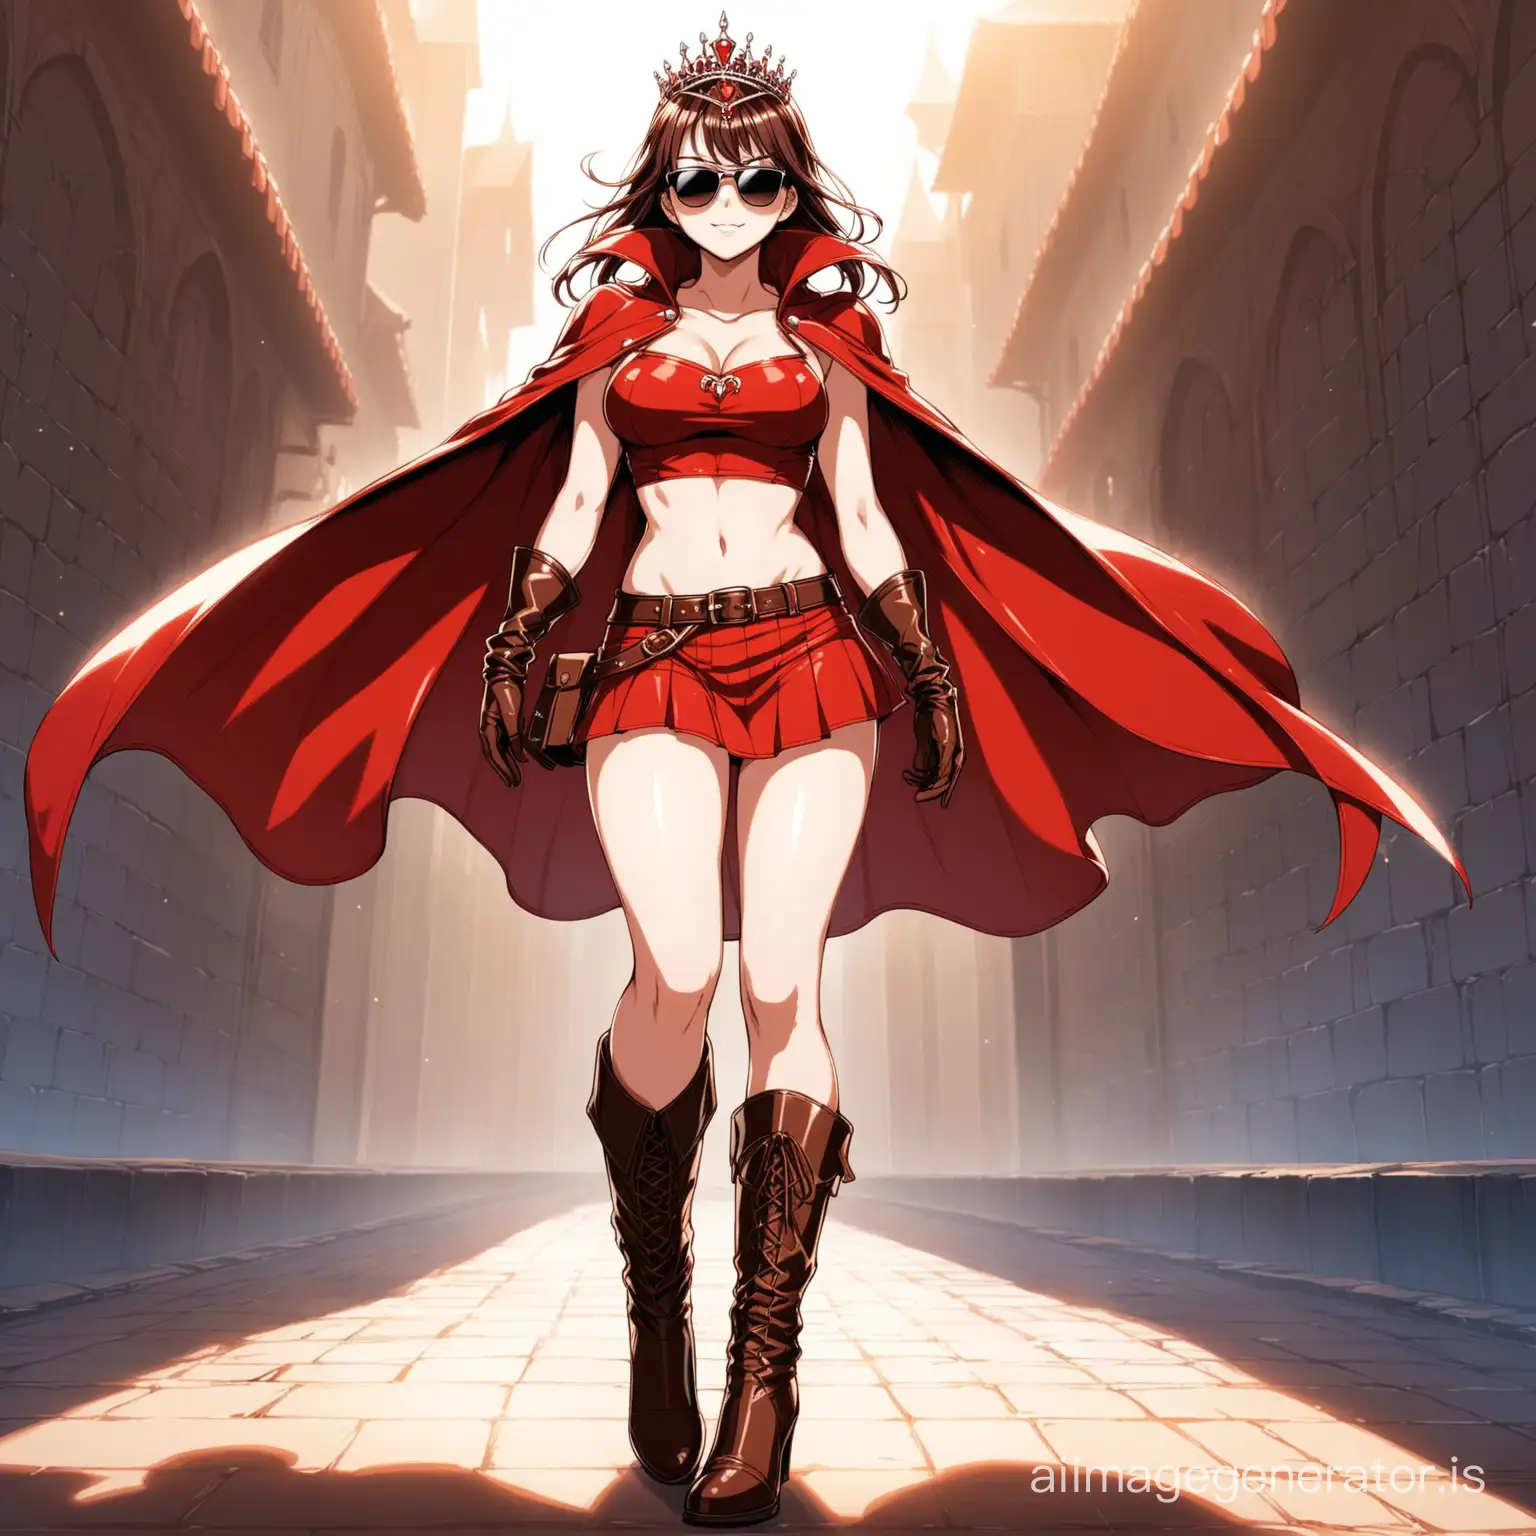 Seductive-Anime-Girl-in-Red-Croptop-and-Leather-Ensemble-with-Sunglasses-and-Tiara